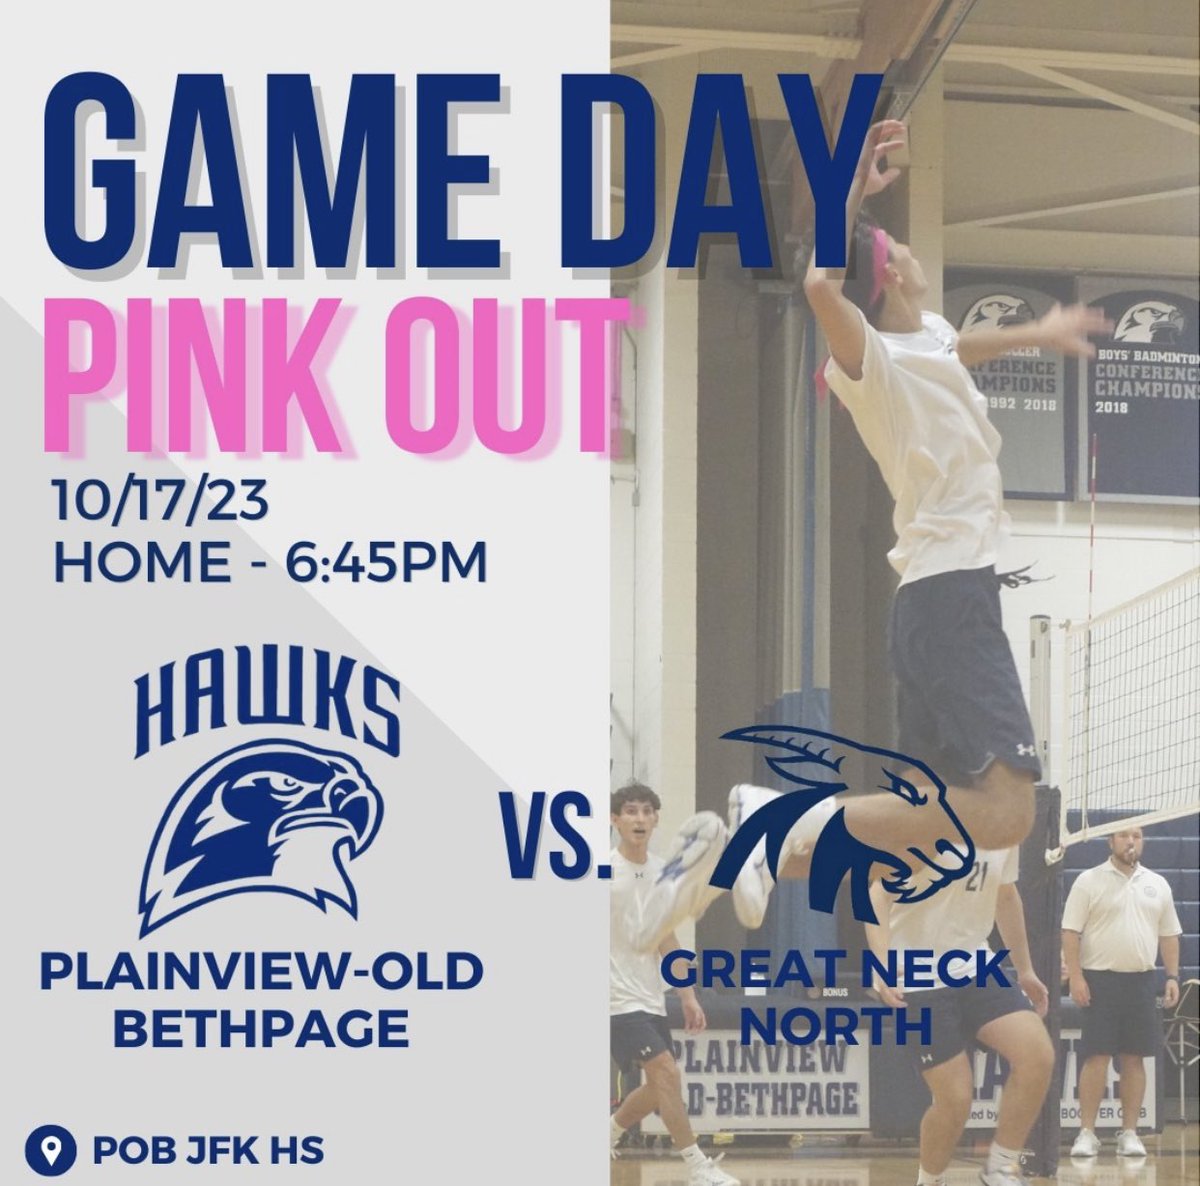 Come out and Support the B Volleyball team at their annual Pink Out game! let’s Go Hawks!! @POBJFK @marytomeara @DrHDvorak #pobhawks